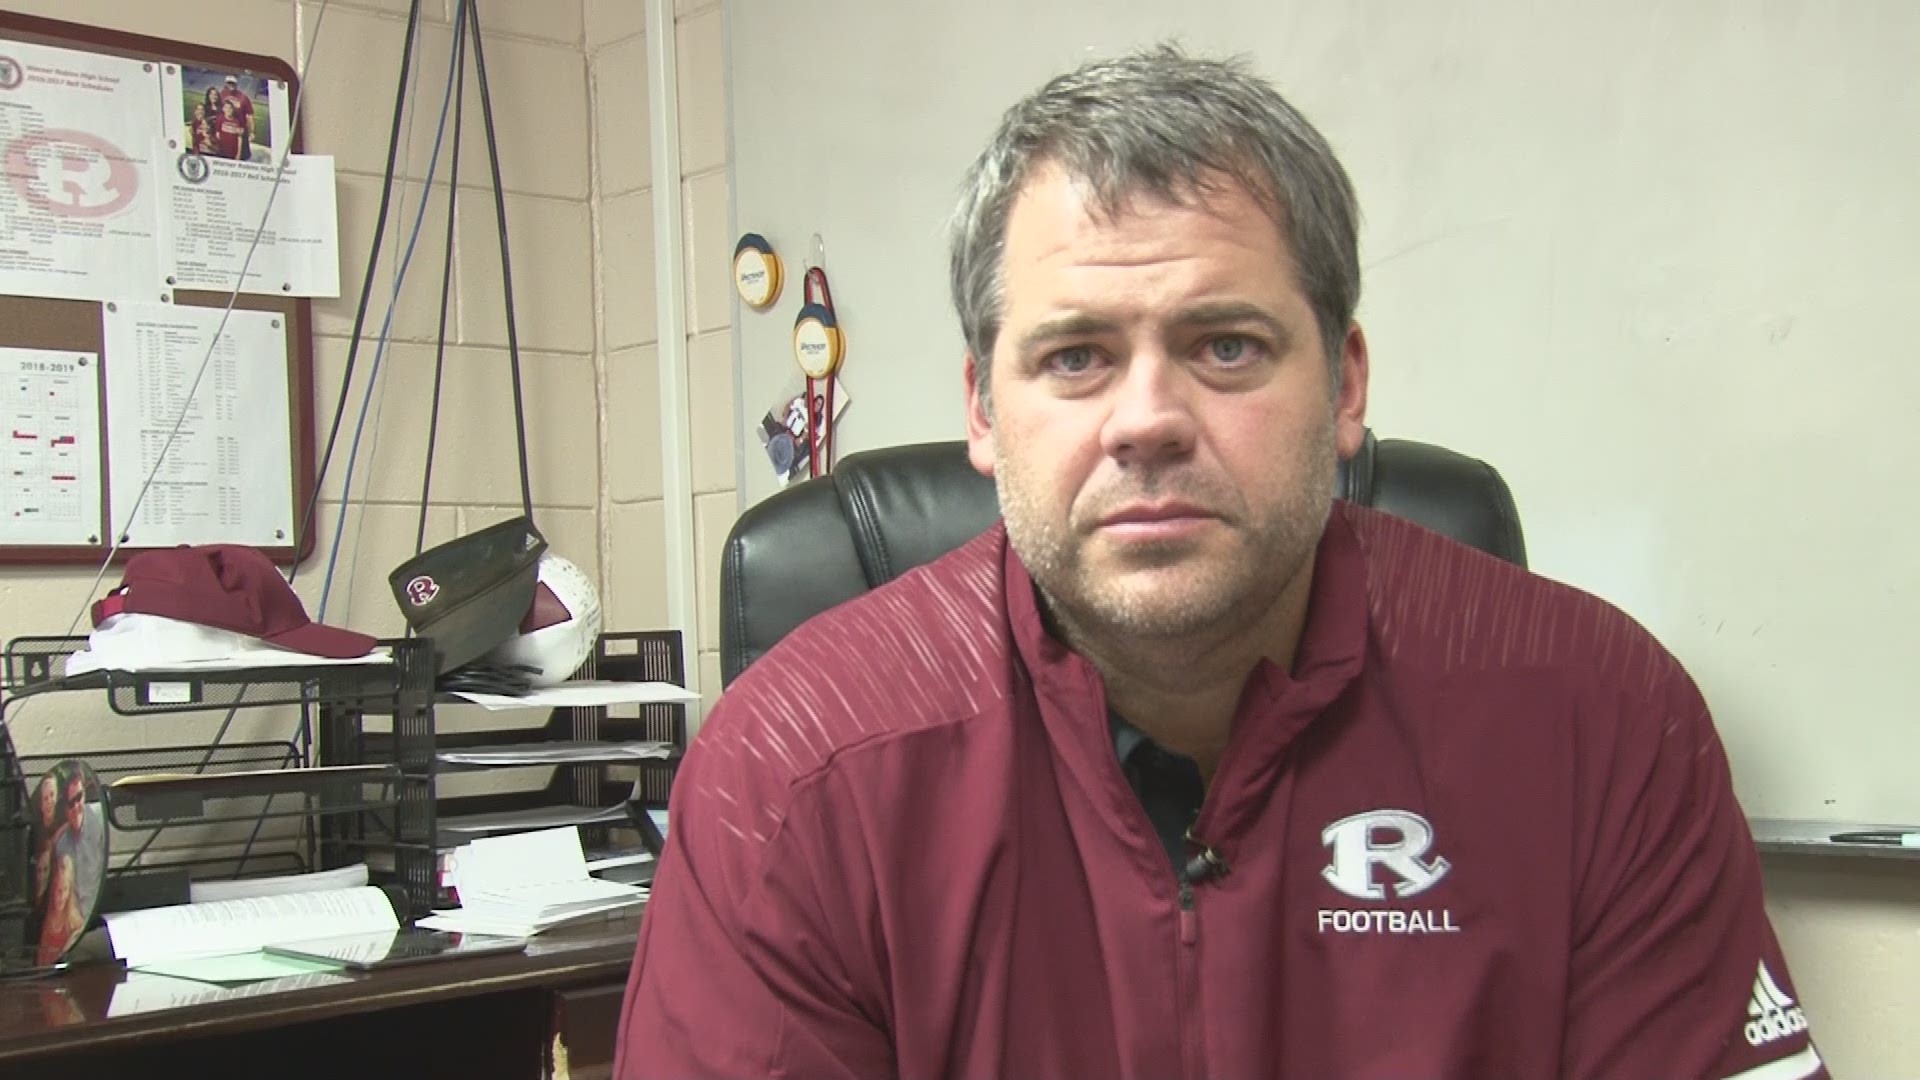 Warner Robins coach Mike Chastain explains controversial play